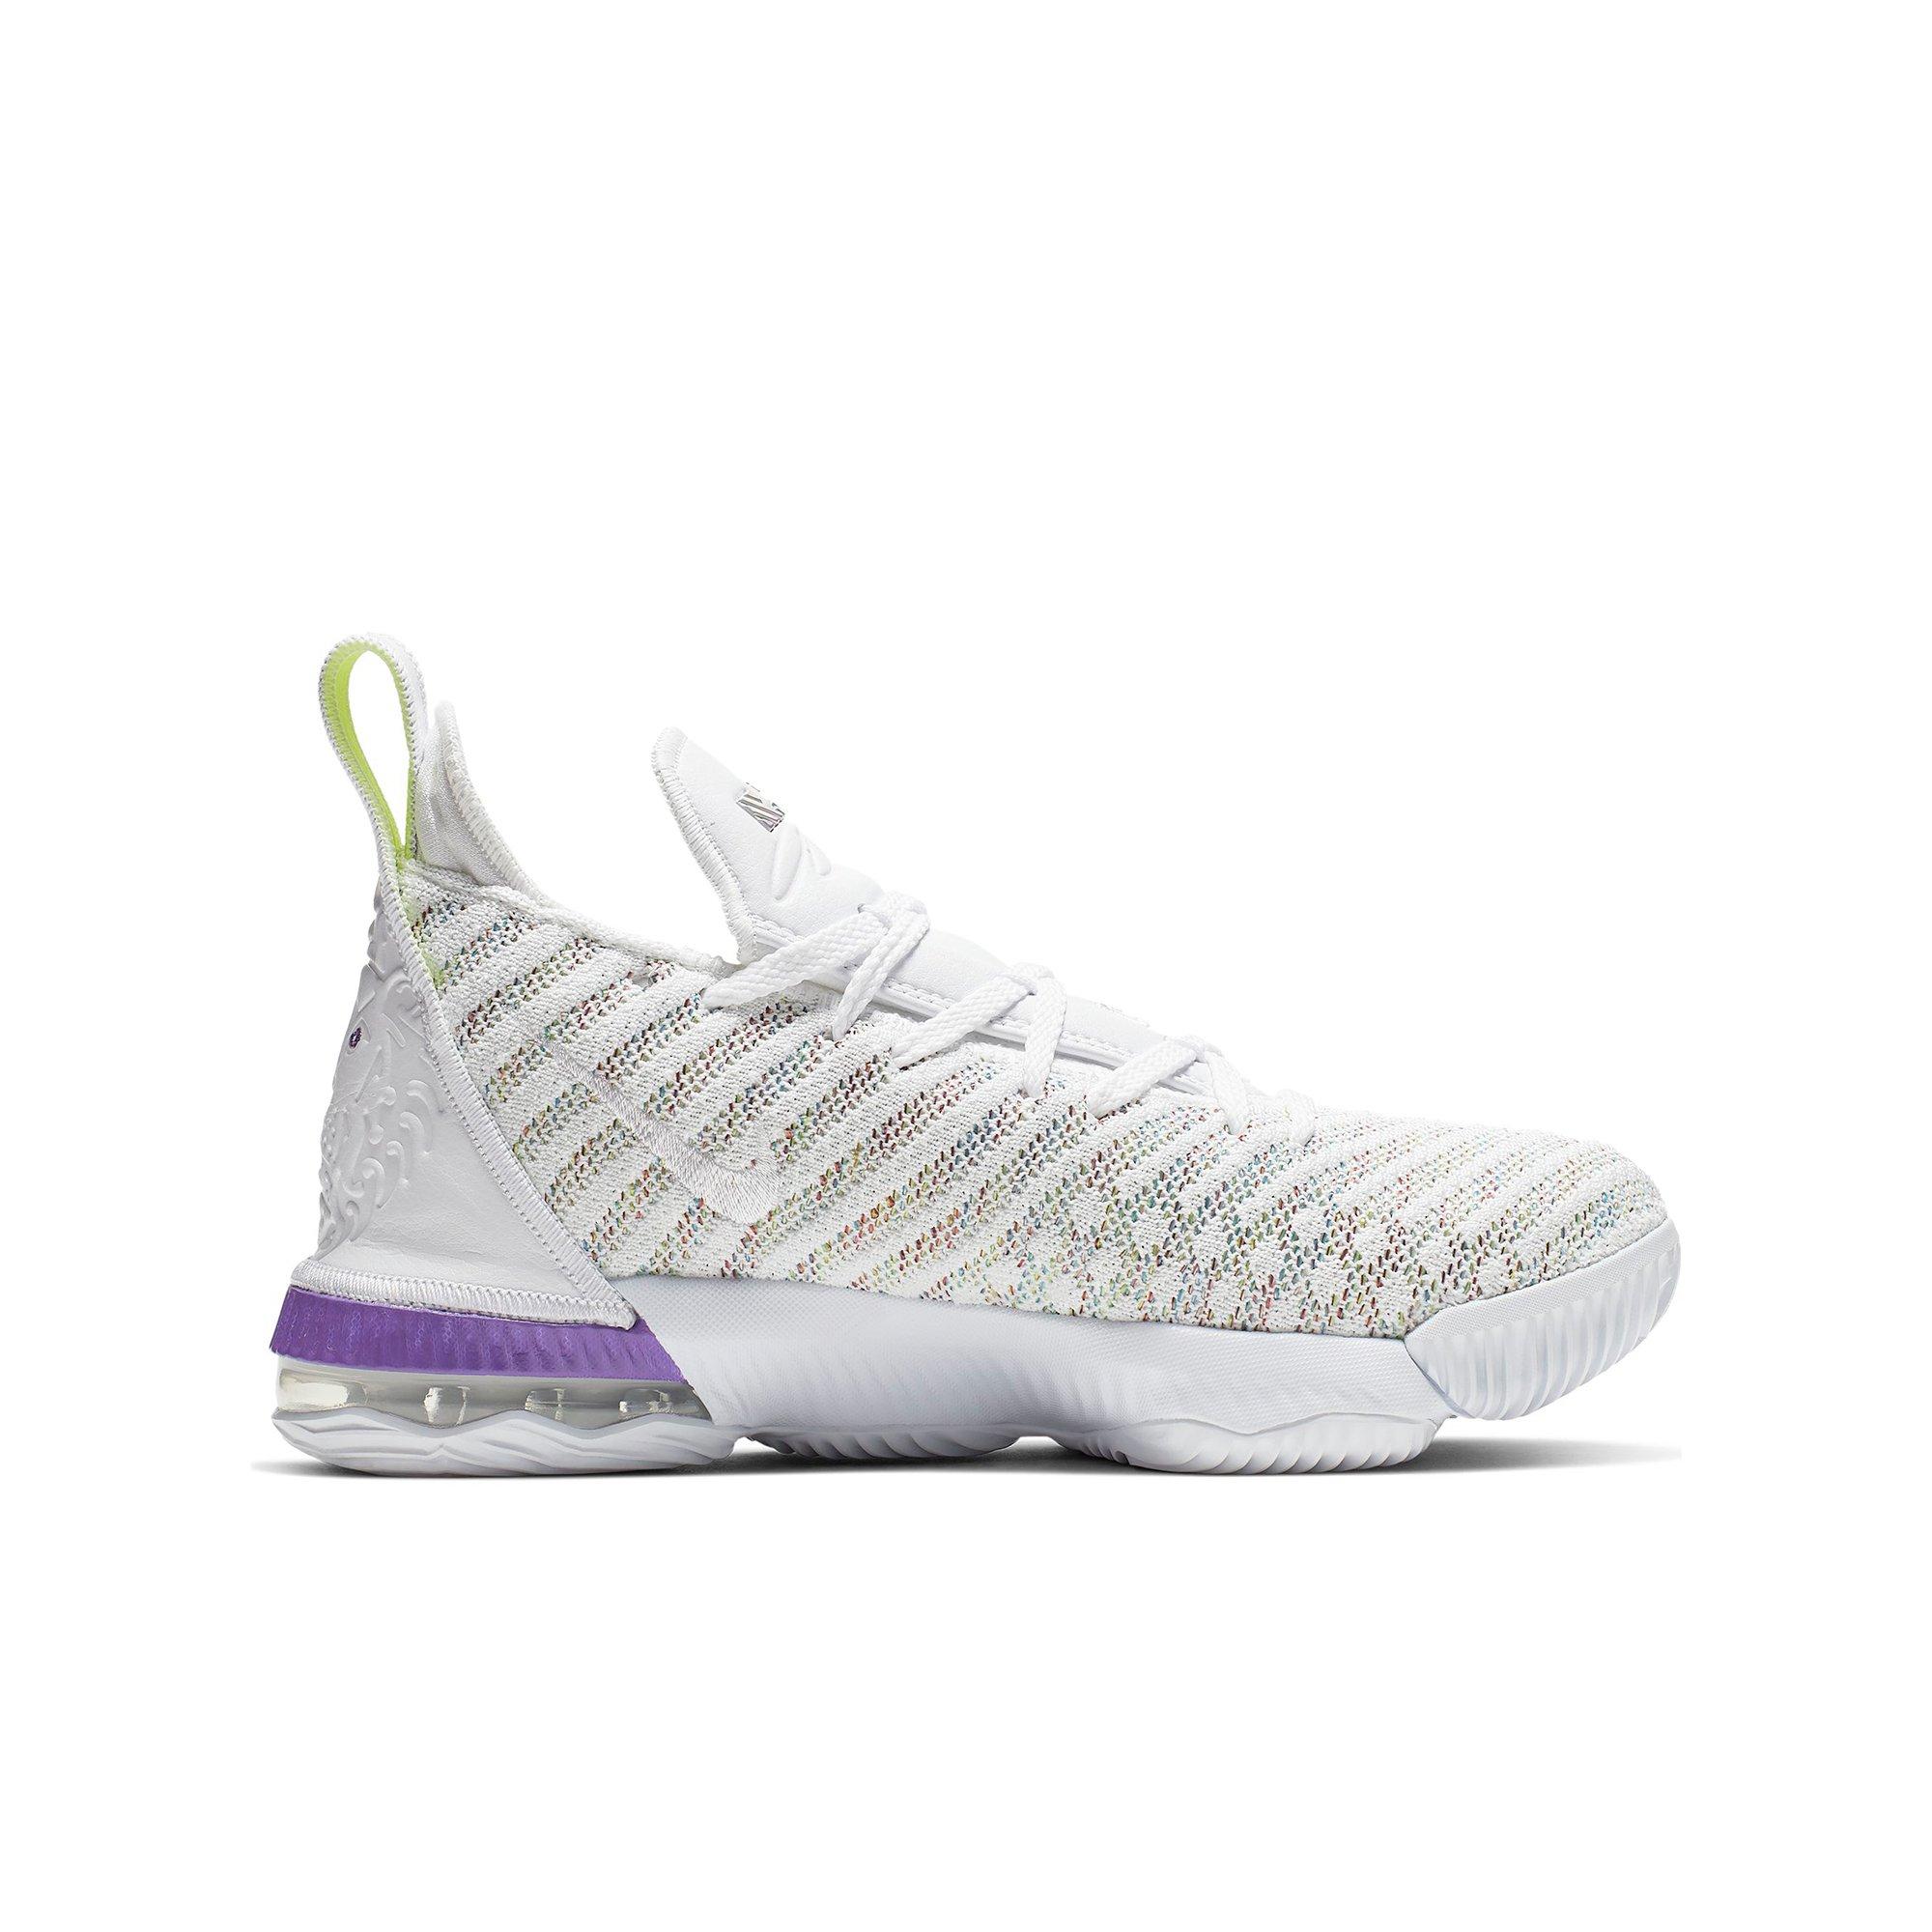 lebron 16s for kids